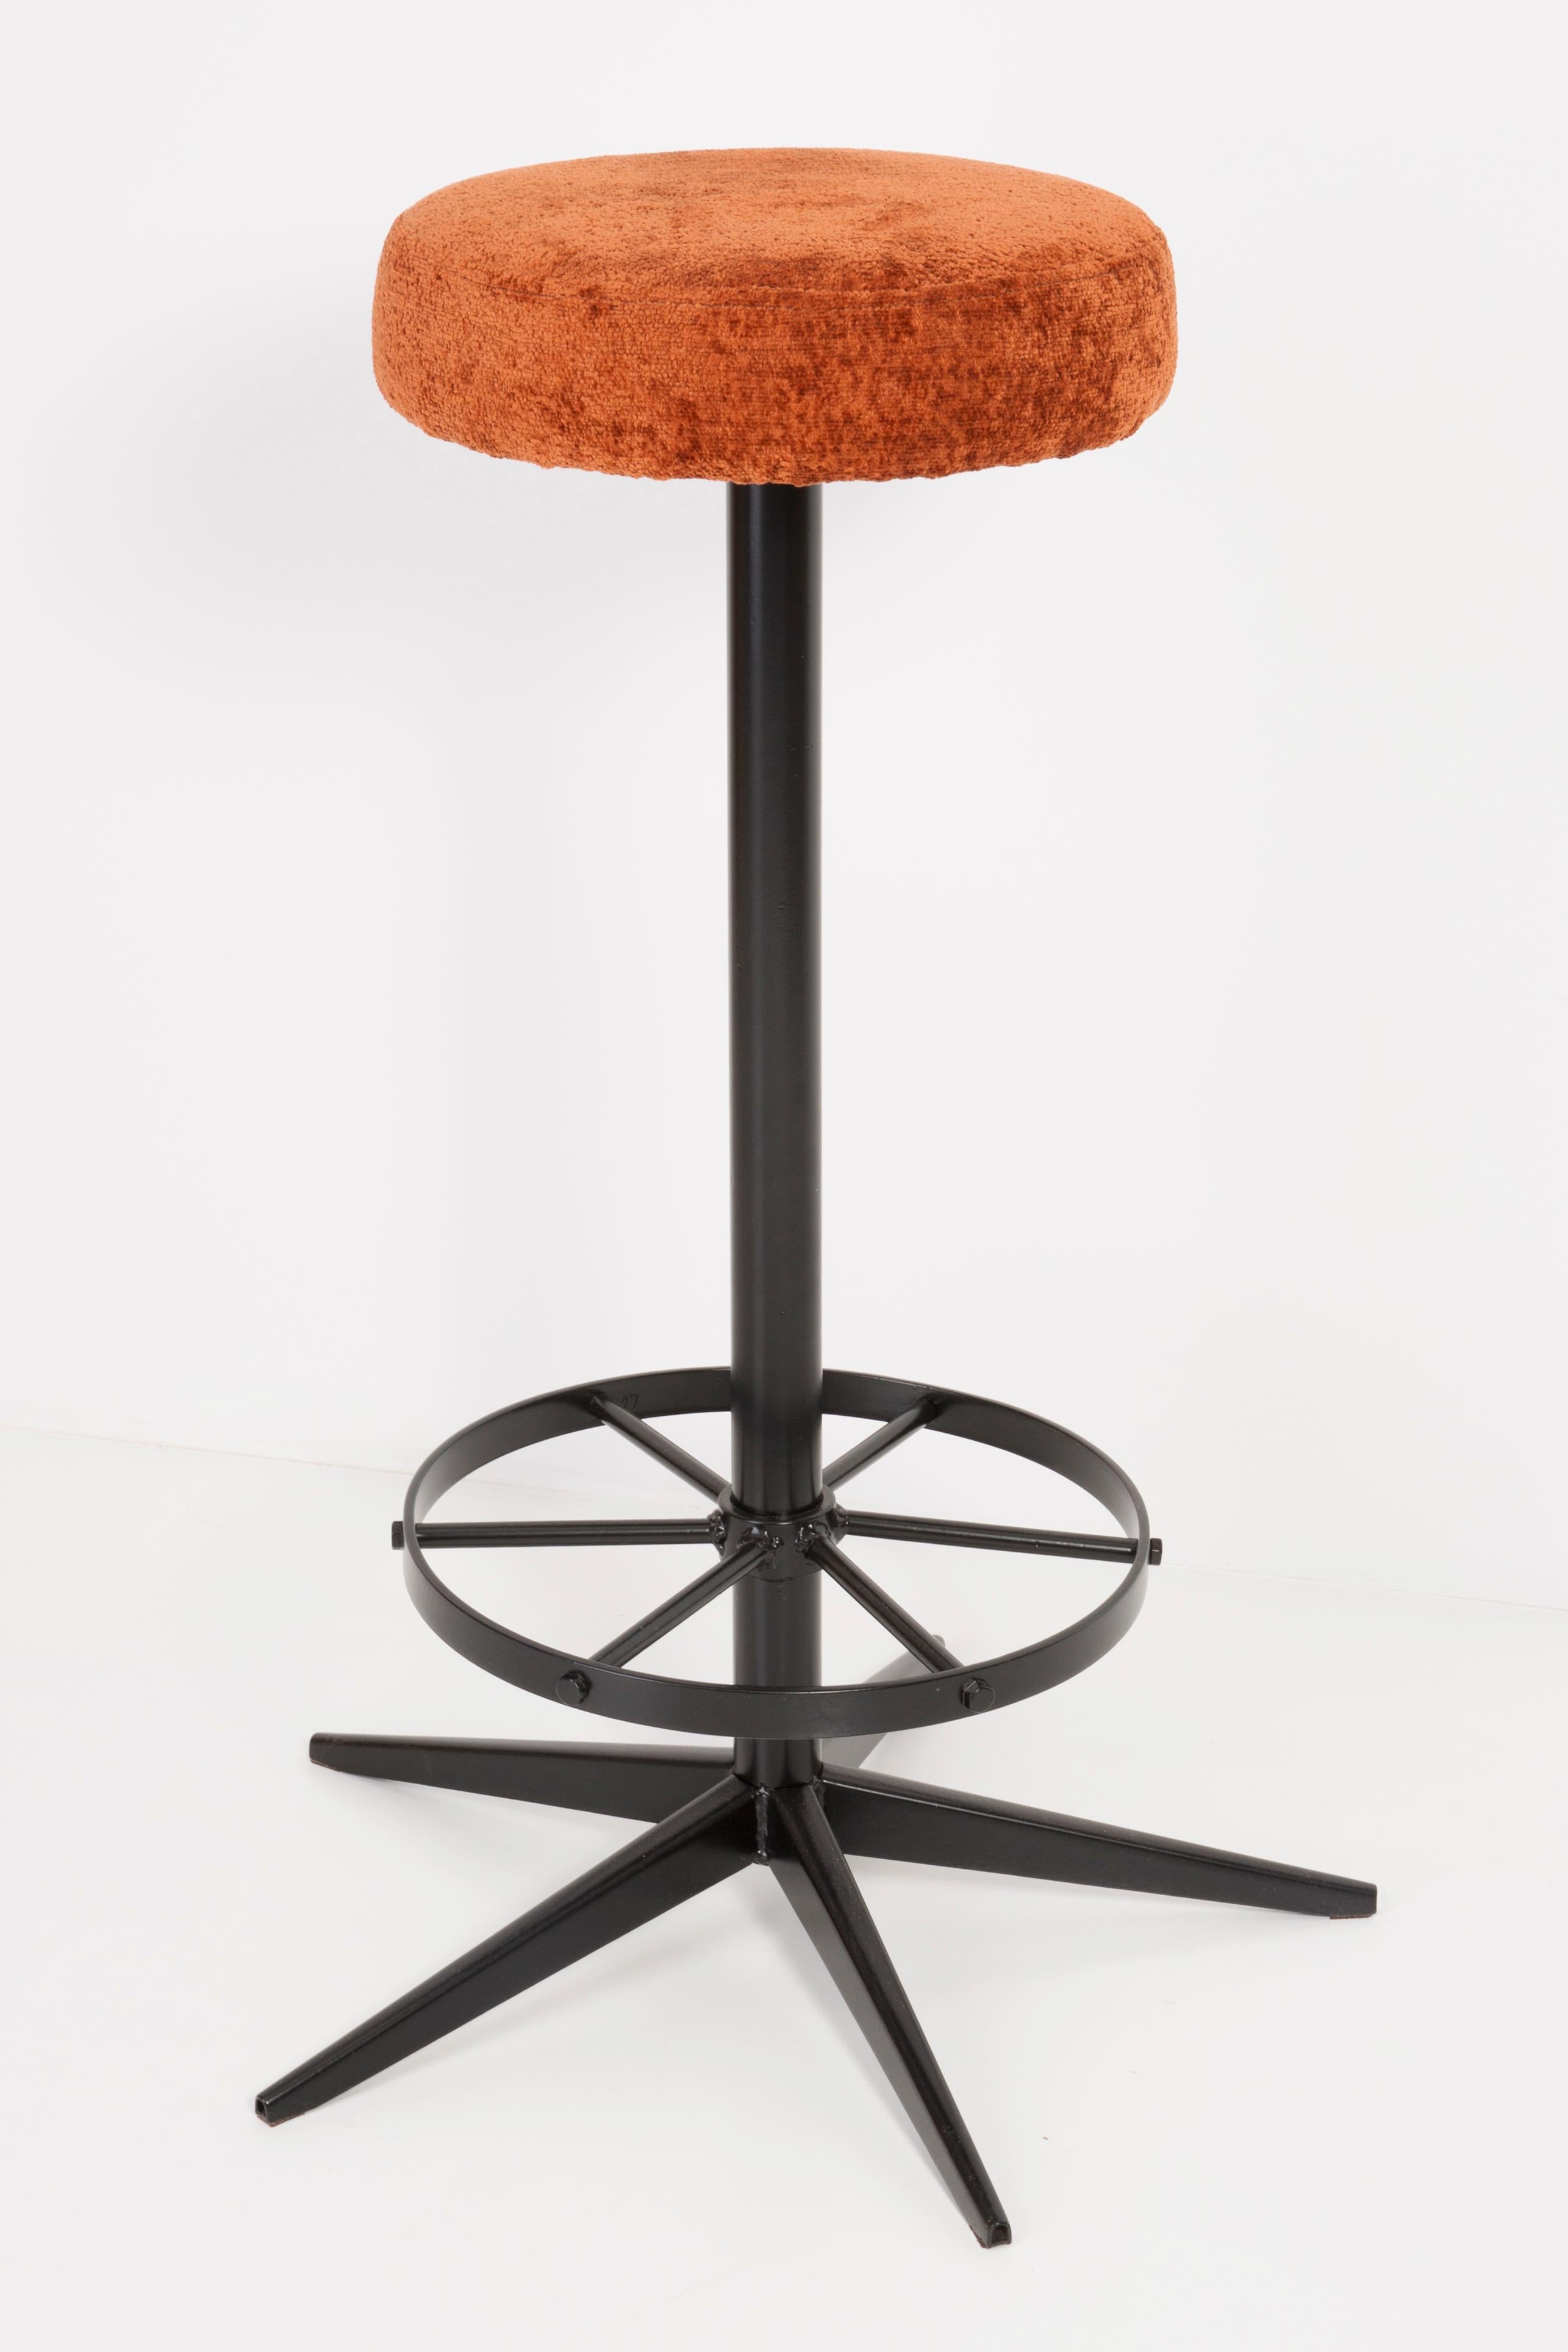 Stool from the turn of the 1960s. Produced in Germany. Beautiful, well-crafted dark orange upholstery. The stool consists of an upholstered part, a seat and steel black legs. Not regulated. The height is constant.